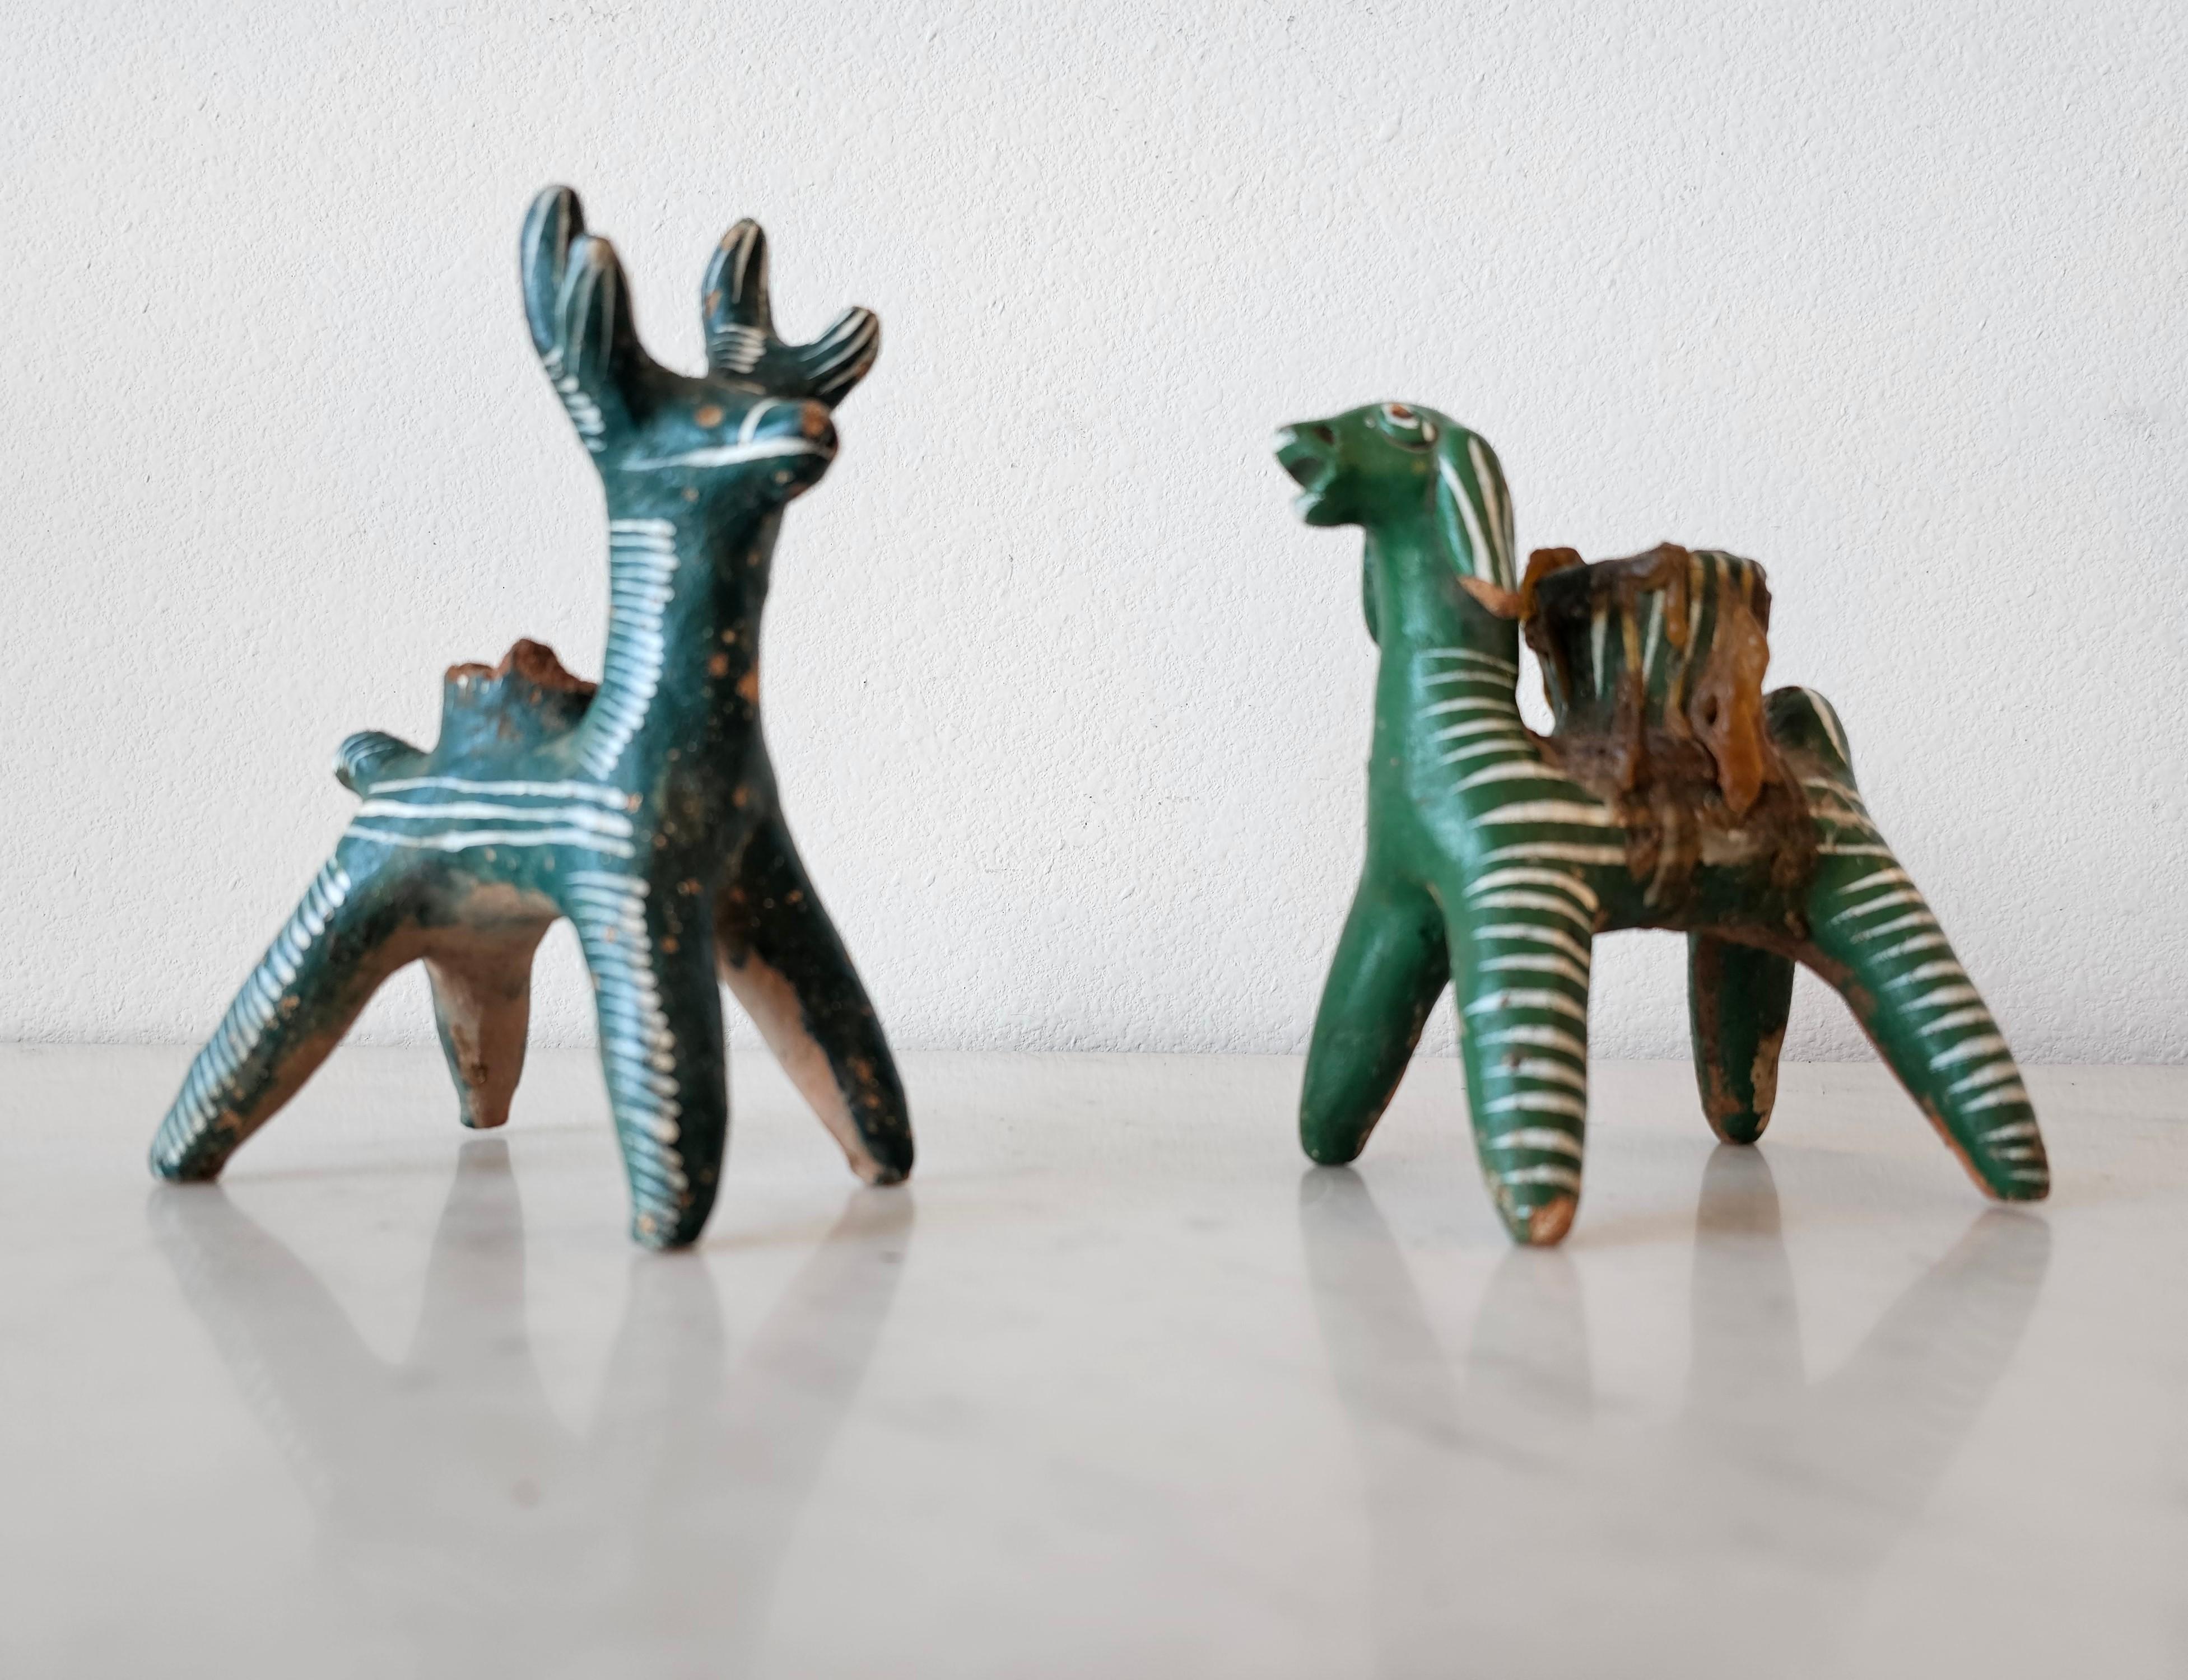 Vintage Nahua Pottery Chililico Hidalgo Mexican Folk Art Animal Candleholders In Fair Condition For Sale In Forney, TX